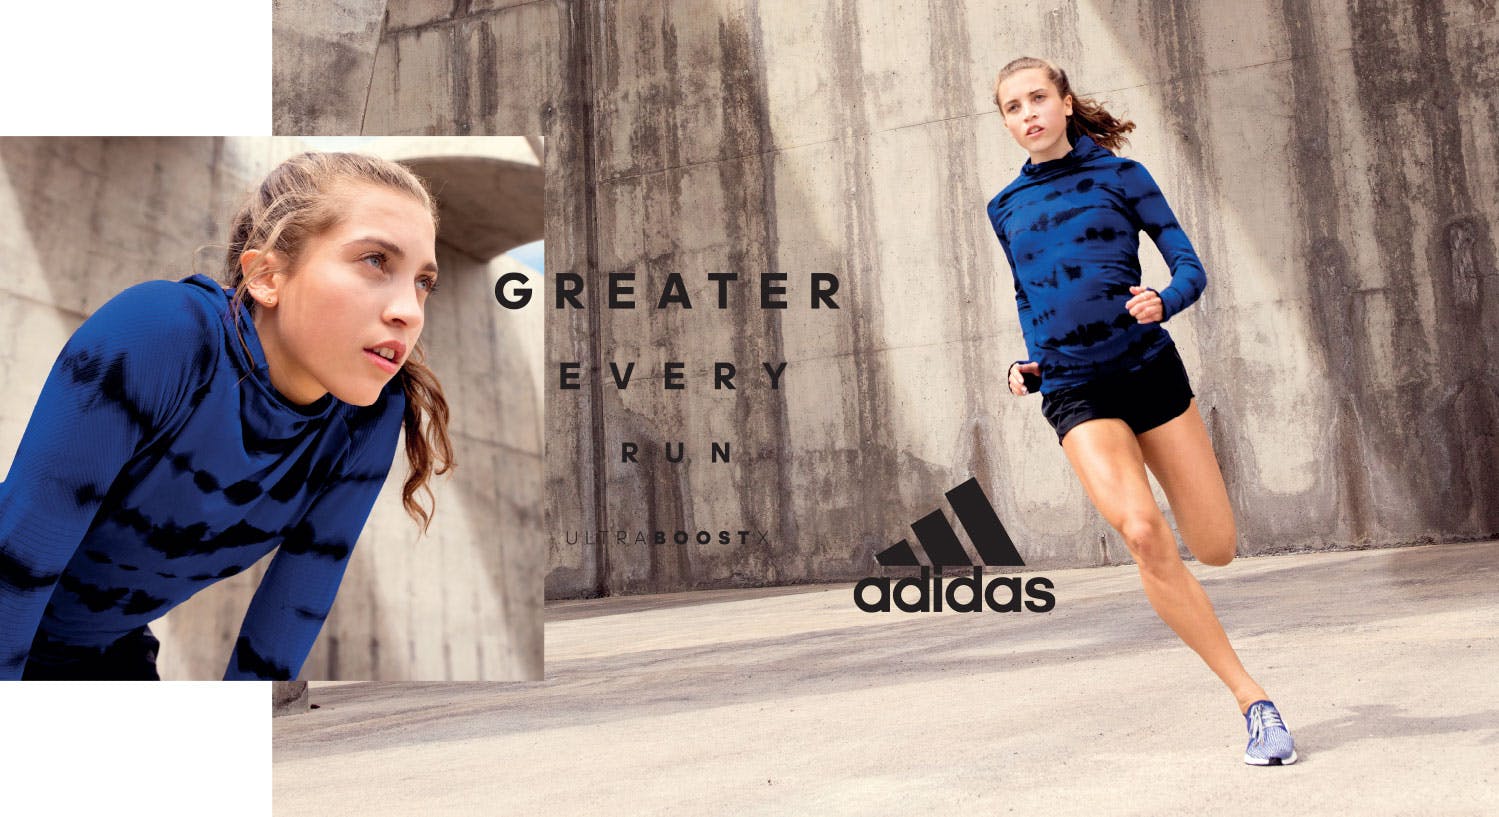 motor Boost ontwikkelen Iris launches Greater Every Run campaign for Adidas UltraBoost X